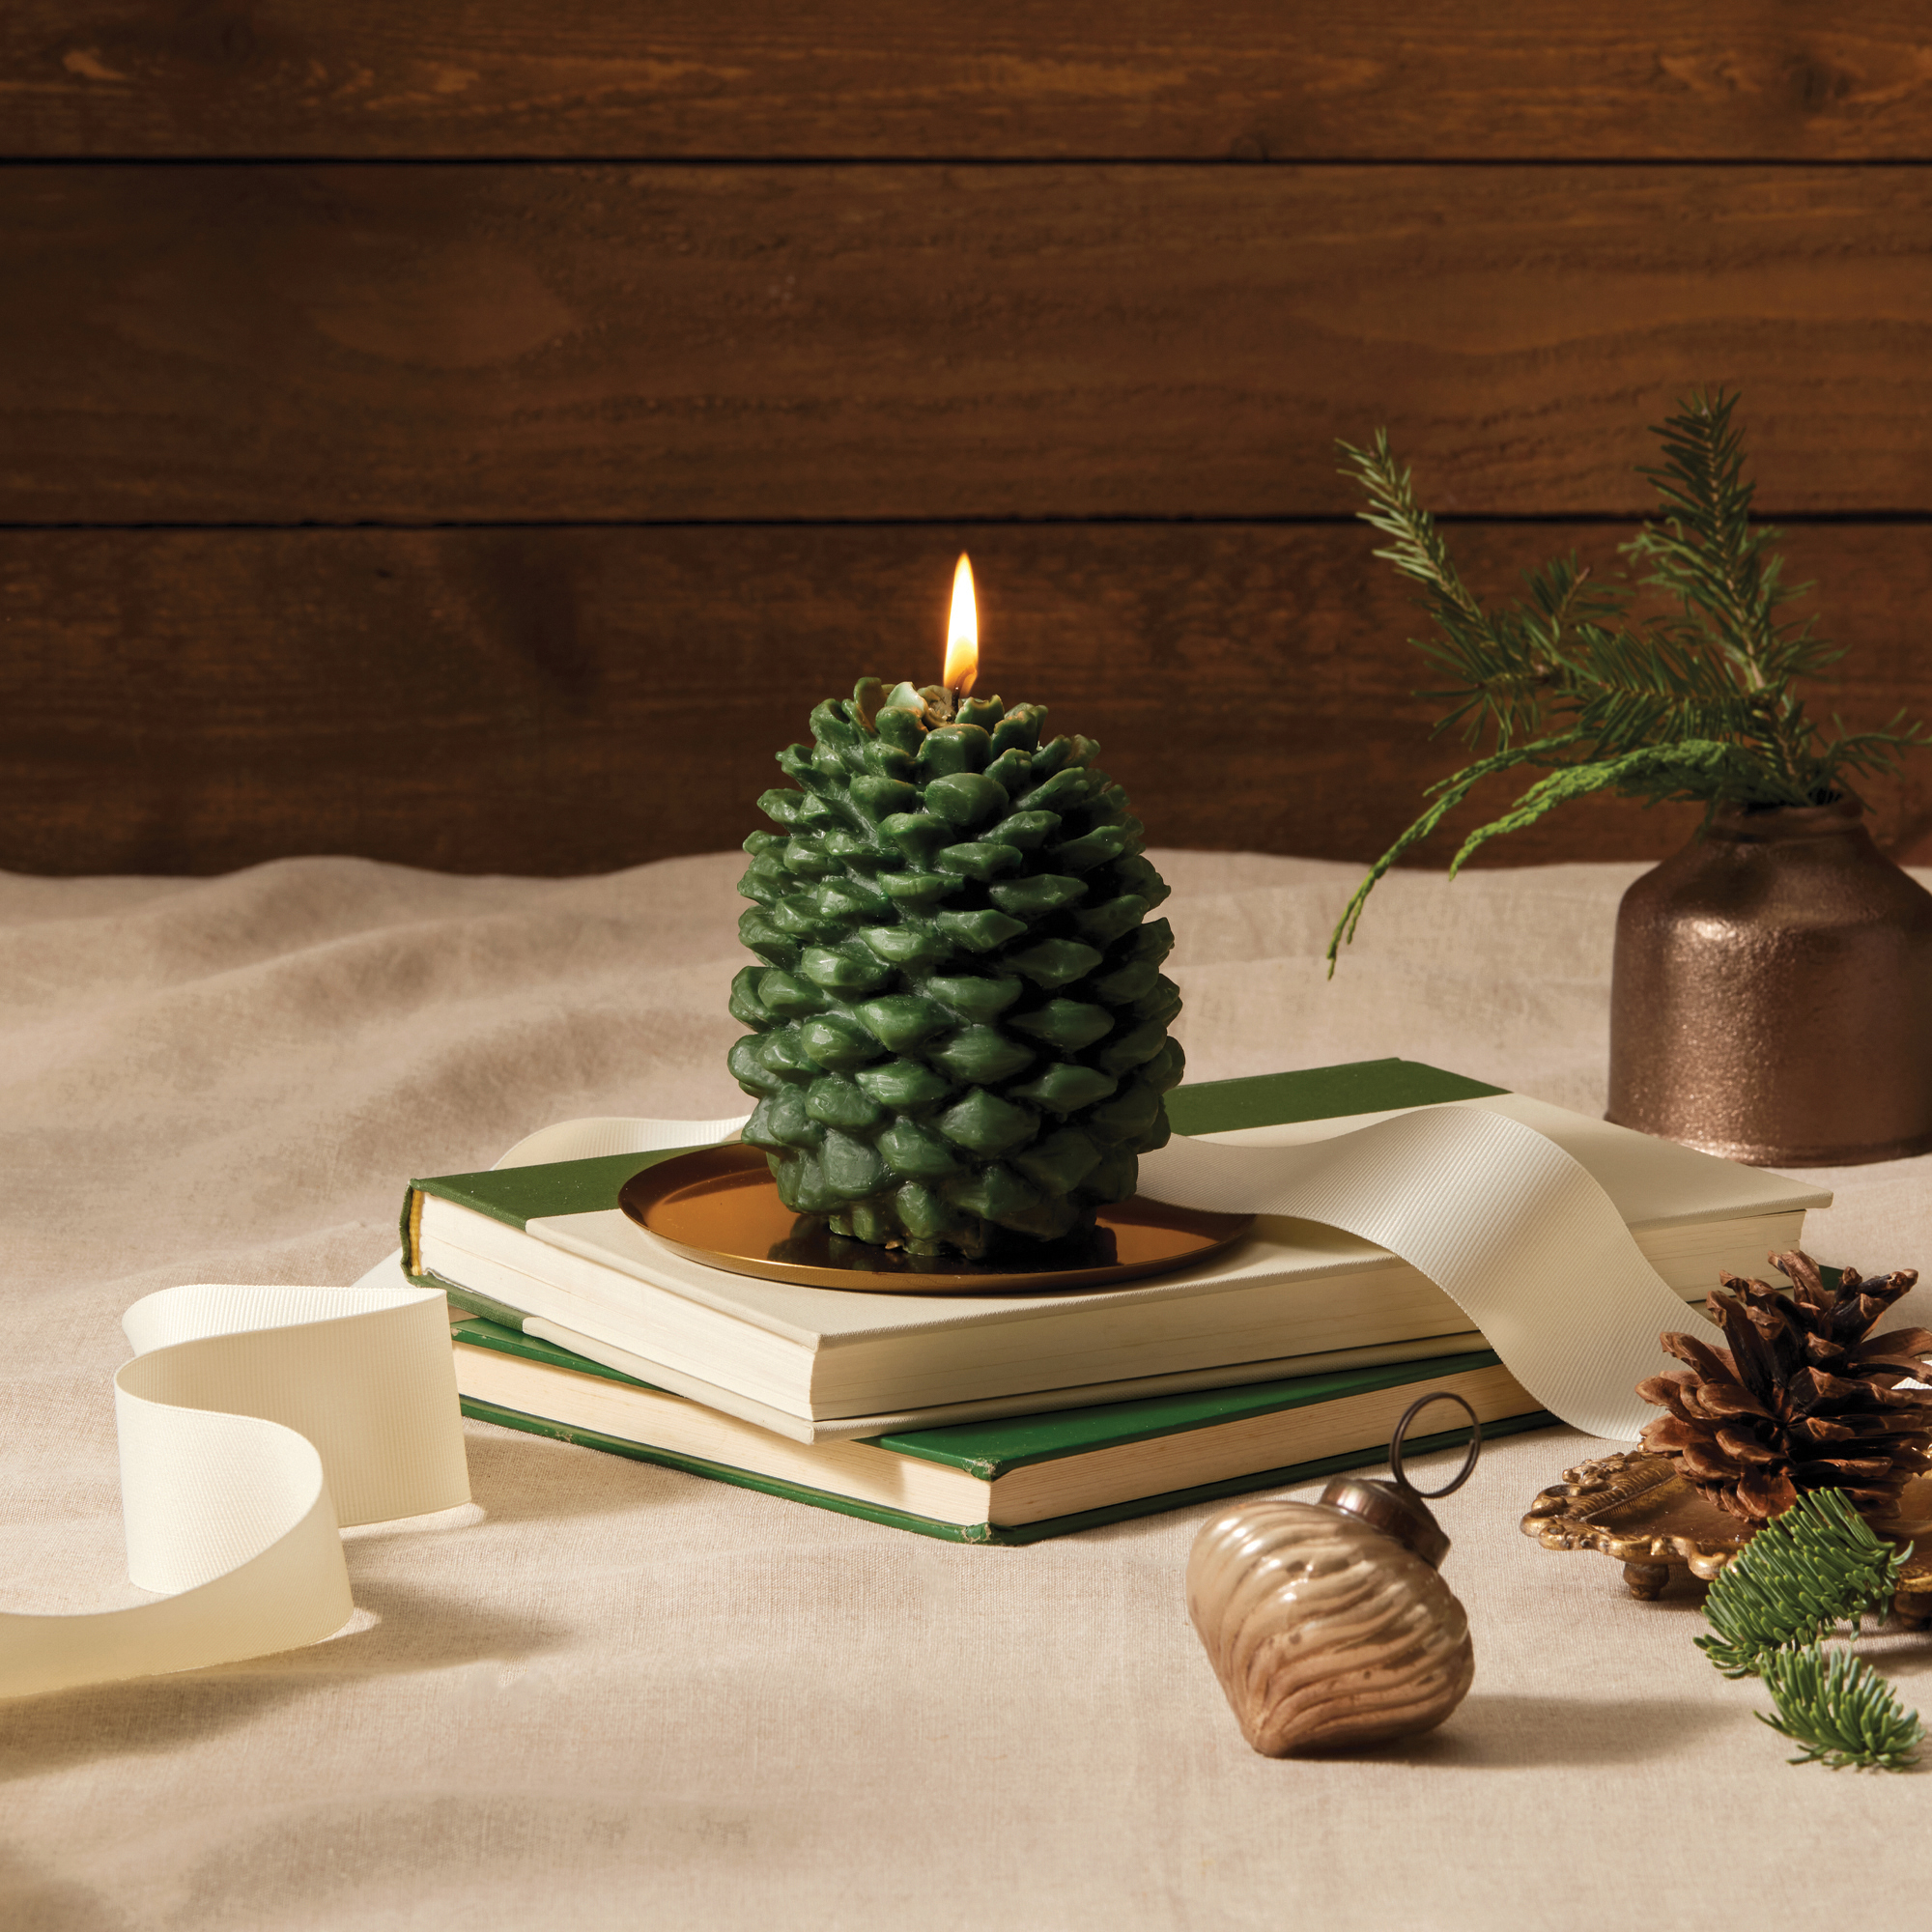 Thymes-FRASIER FIR PINECONE PETITE CANDLE – Signature Finishes